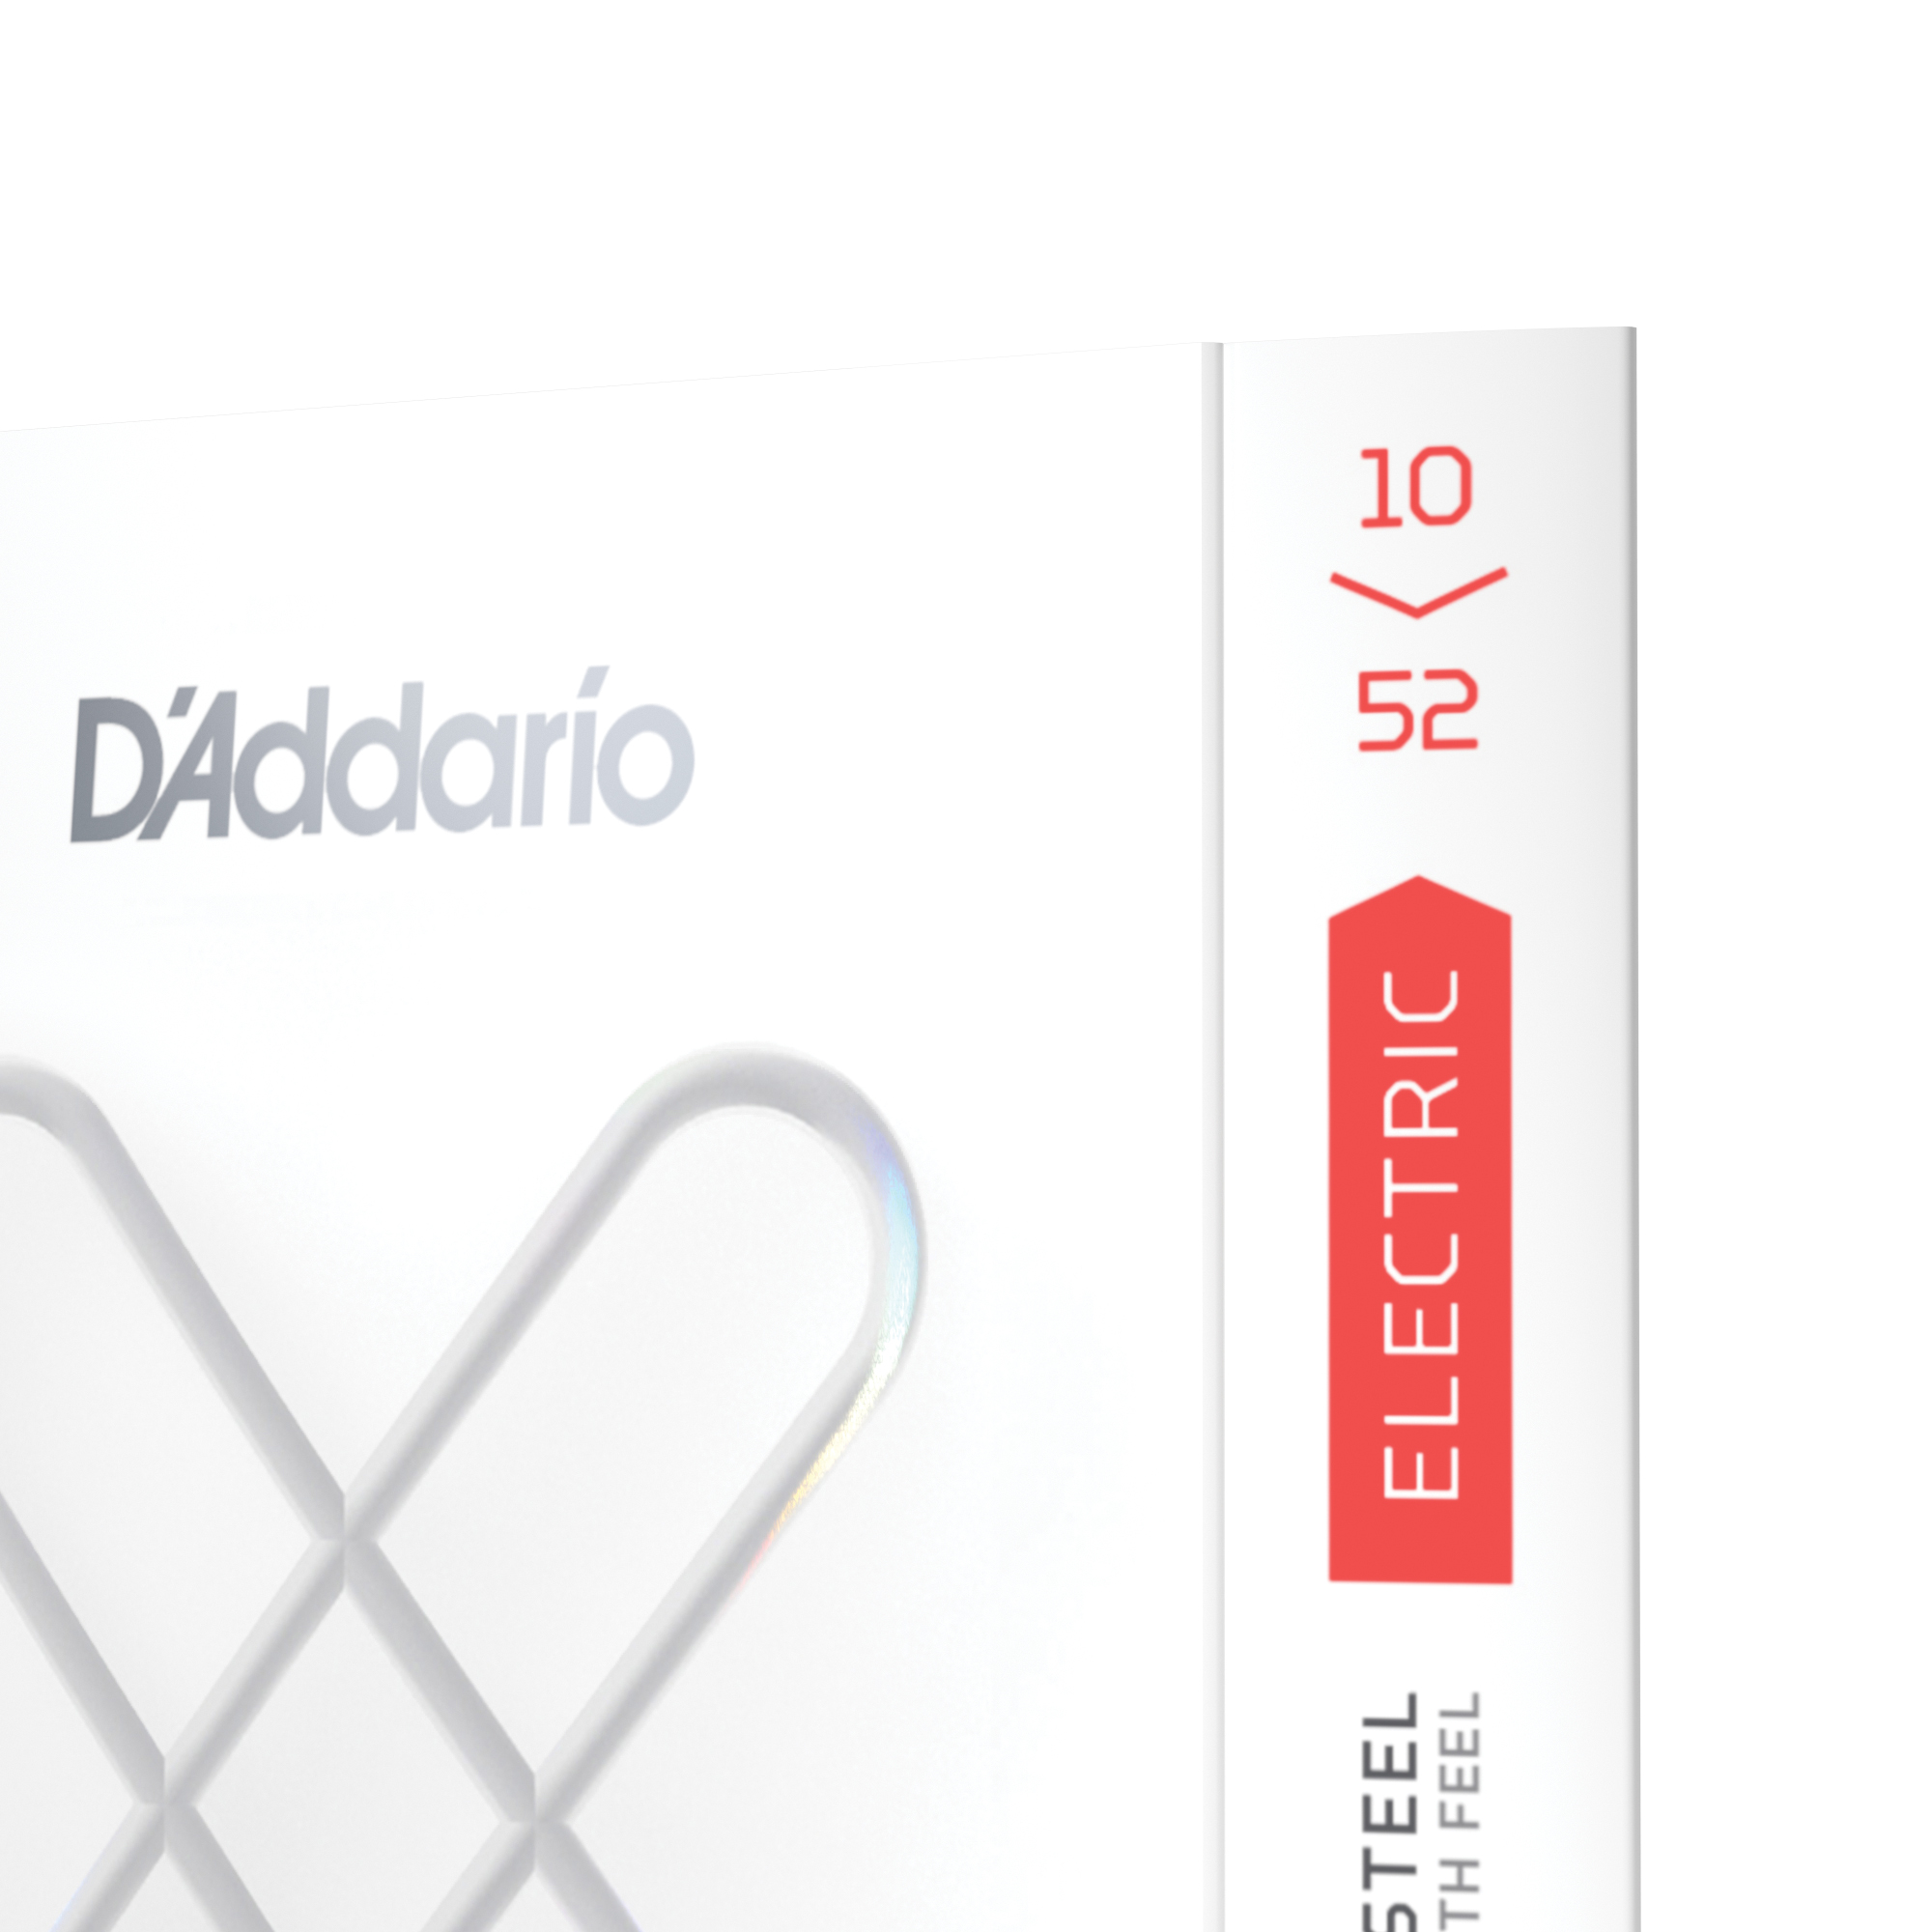 D'addario Xse1052 Nickel Plated Steel Coated Round Wound Electric Guitar 6c 10-52 - Electric guitar strings - Variation 3